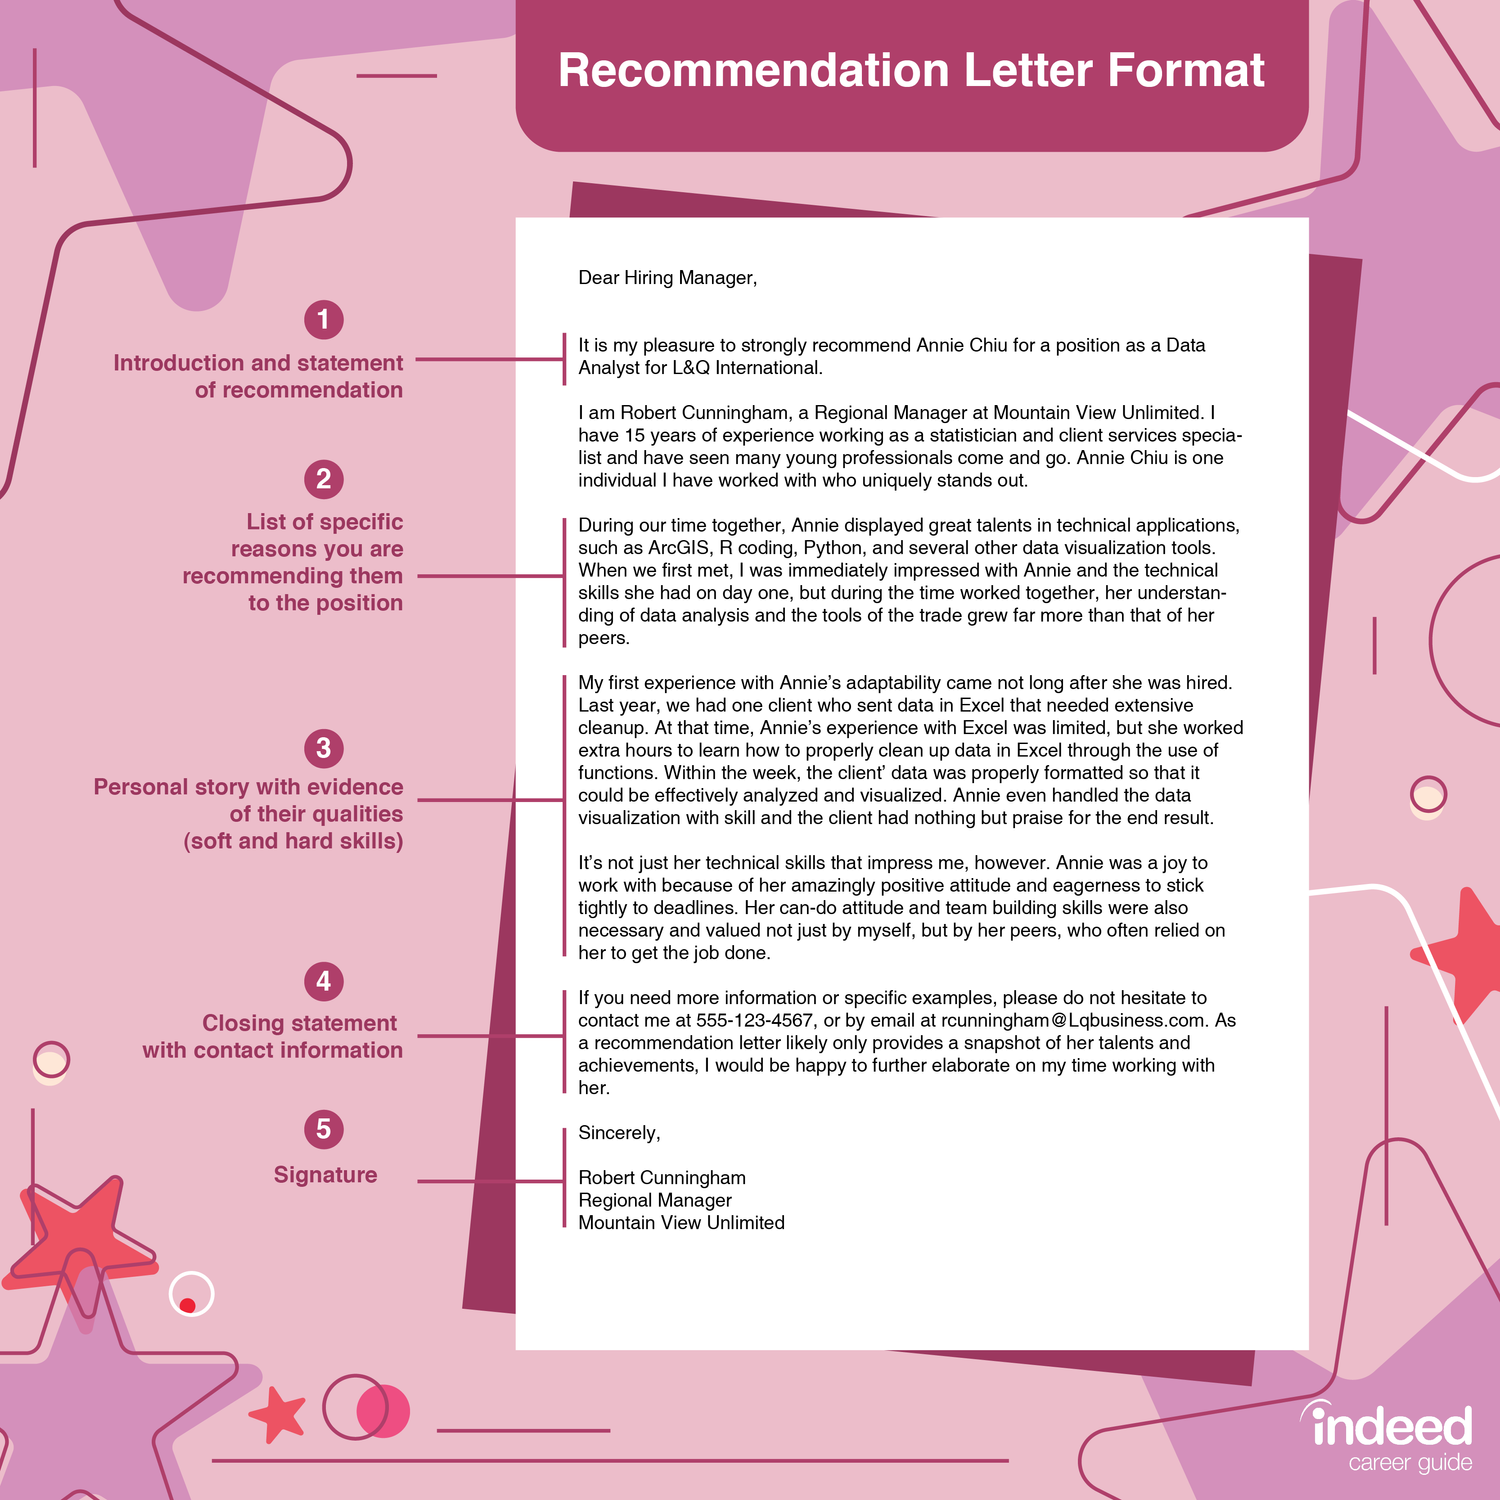 tips to request and write a letter of recommendation | indeed.com sample resume laborer it objective statement examples